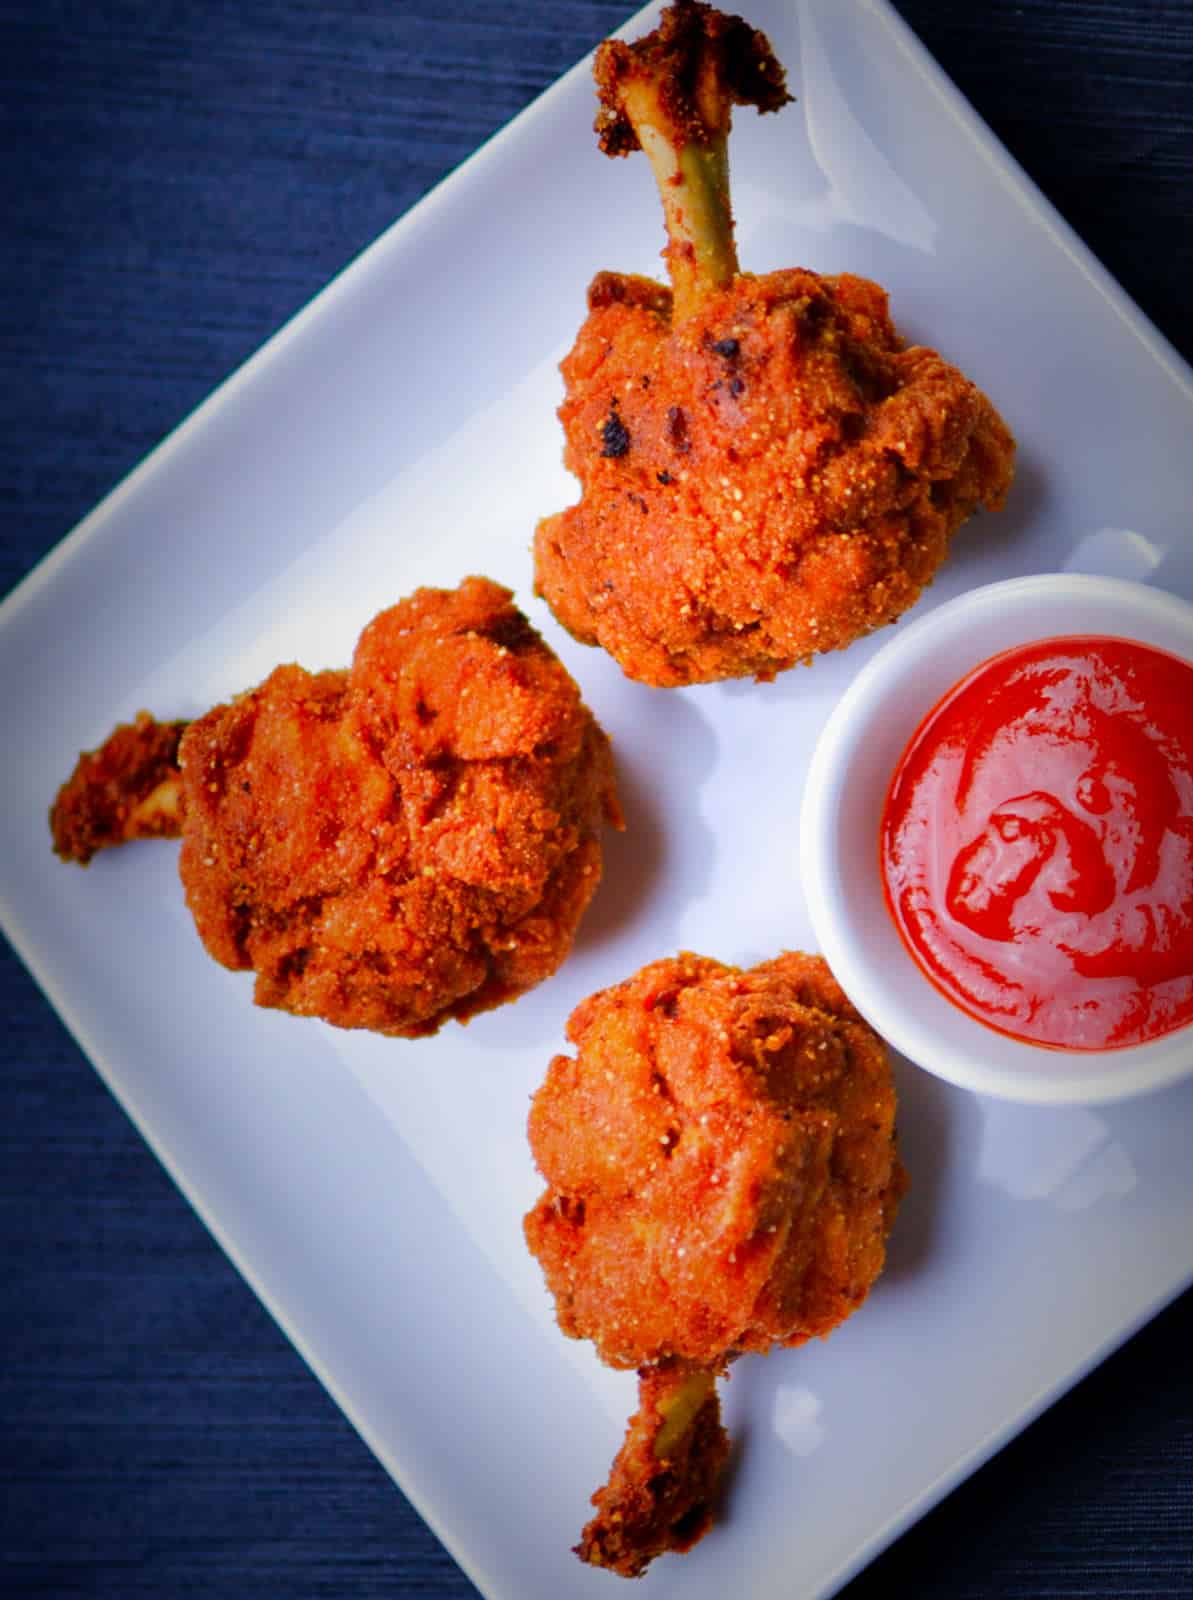 Chicken lollipops placed on a white plate.